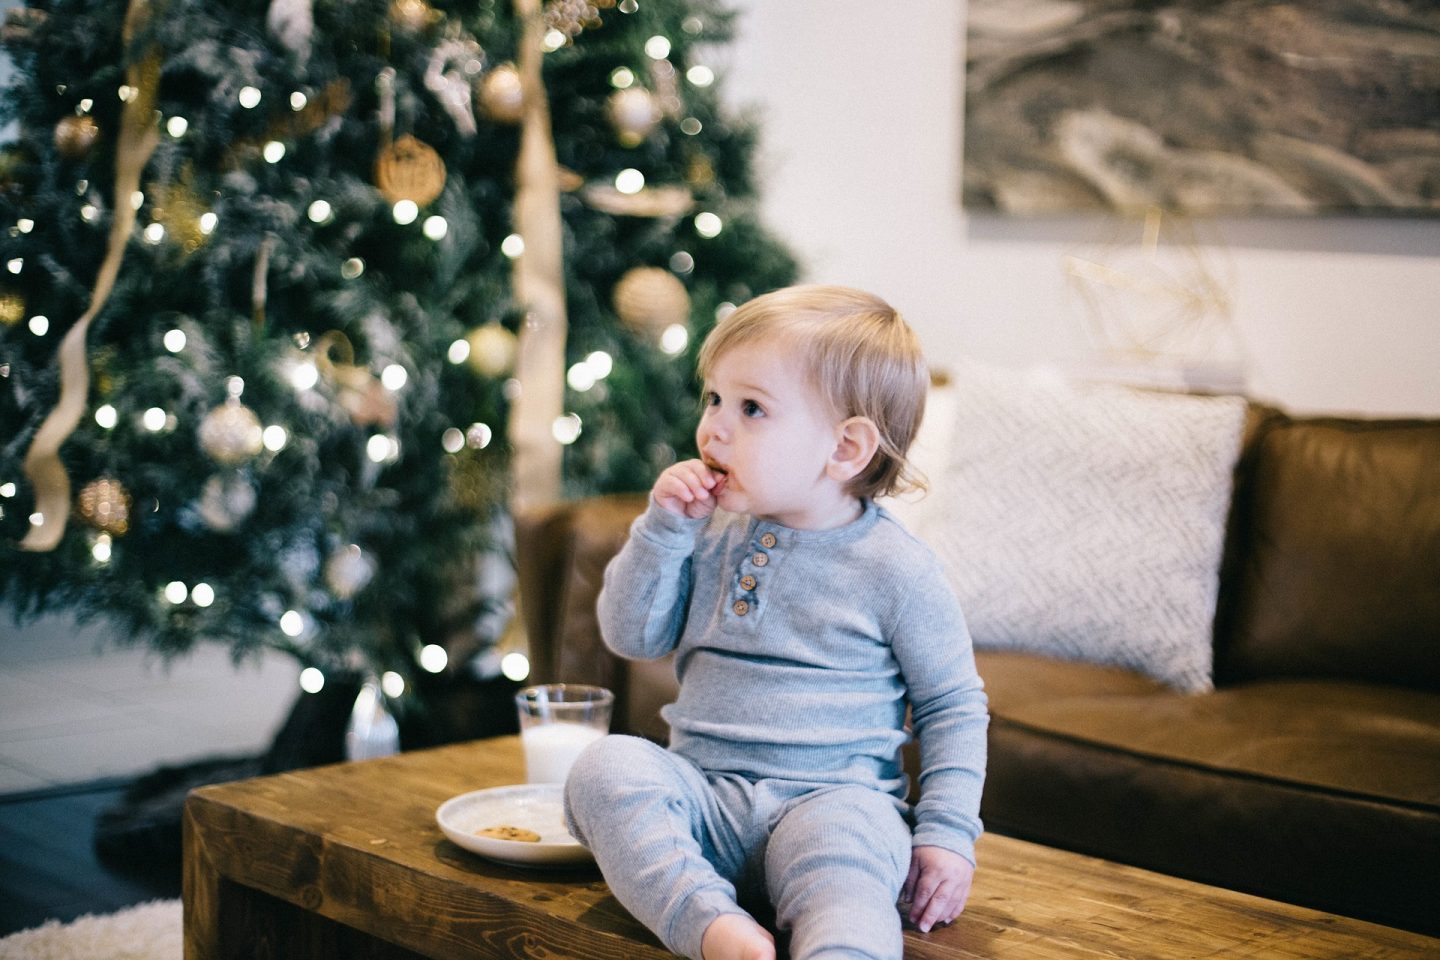 A little boy sits on a coffee table with a christmas tree in the background